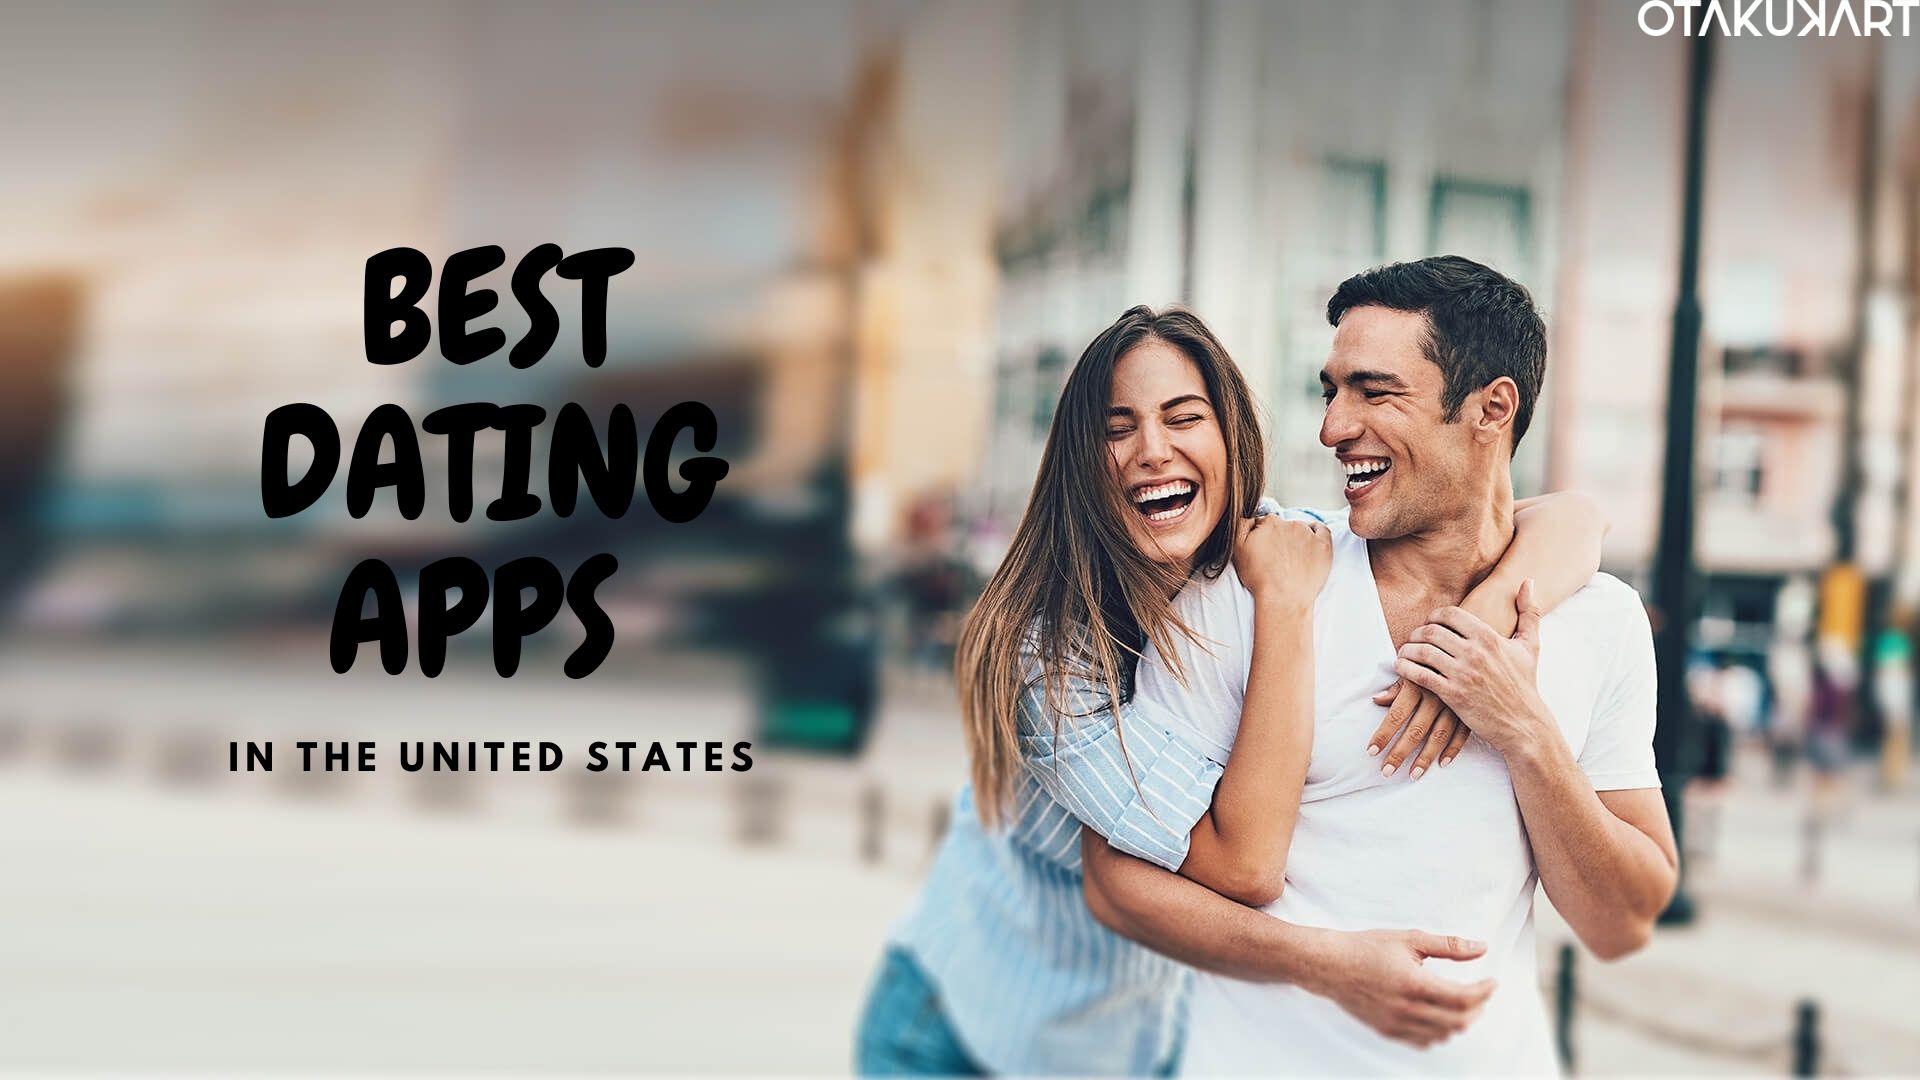 Best Dating Apps in the United States